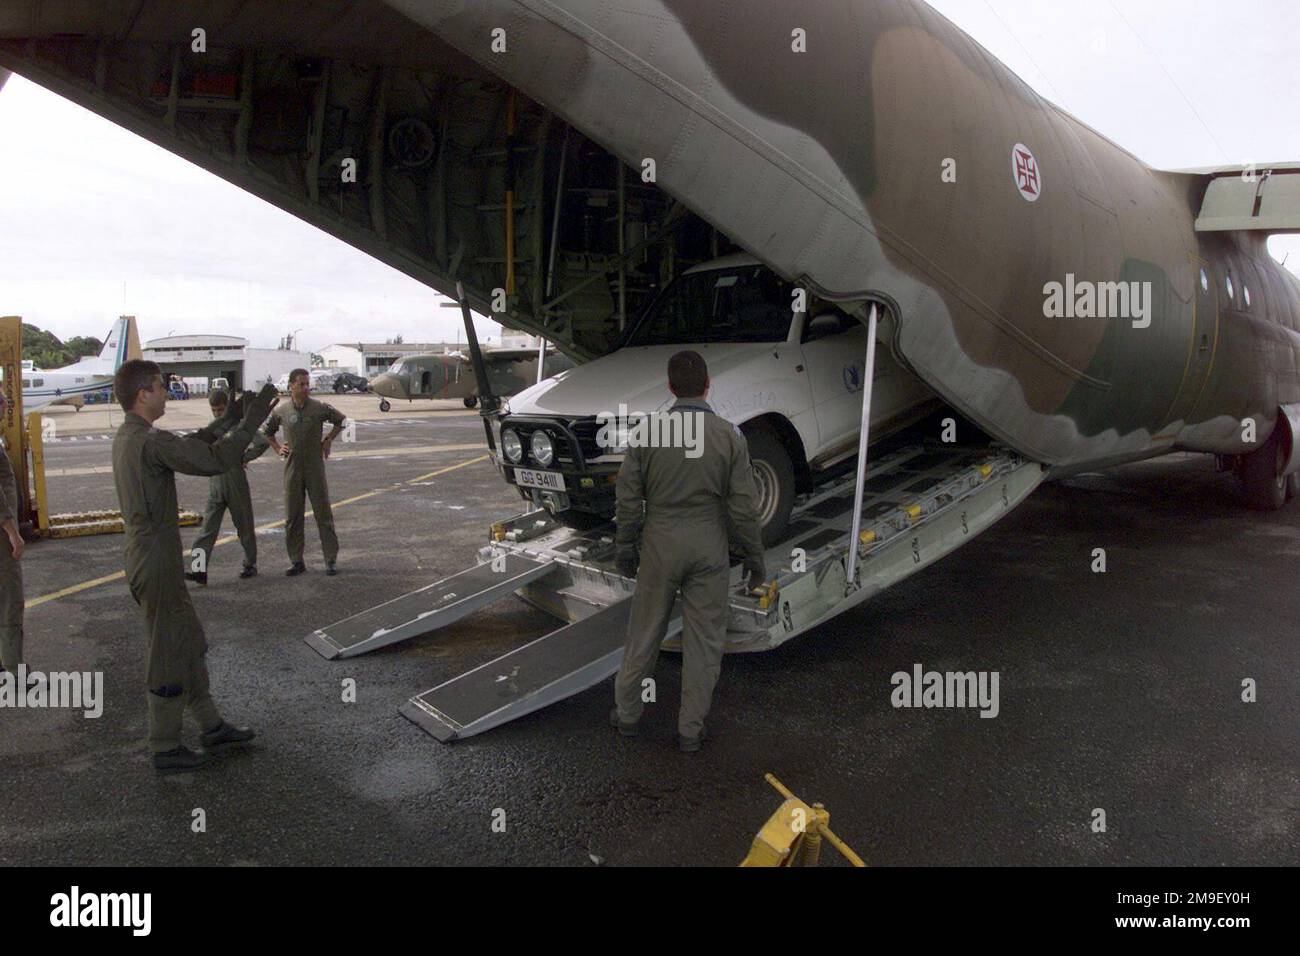 Right side rear medium shot as a Portugese Aircrew and local laborers load a vechicle onto a Portugese C-130 at the International Airport at Maputo, Mozambique, Africa on 17 March 2000. The aircraft and its crew are deployed to Maputo in support of Operation Atlas Response, a Humanitarian Aid Operation to help the people of Mozambique after severe flooding (flooding and victims not shown) displaced over a million people from their homes. Subject Operation/Series: ATLAS RESPONSE Base: Maputo State: Inhambane Country: Mozambique (MOZ) Stock Photo